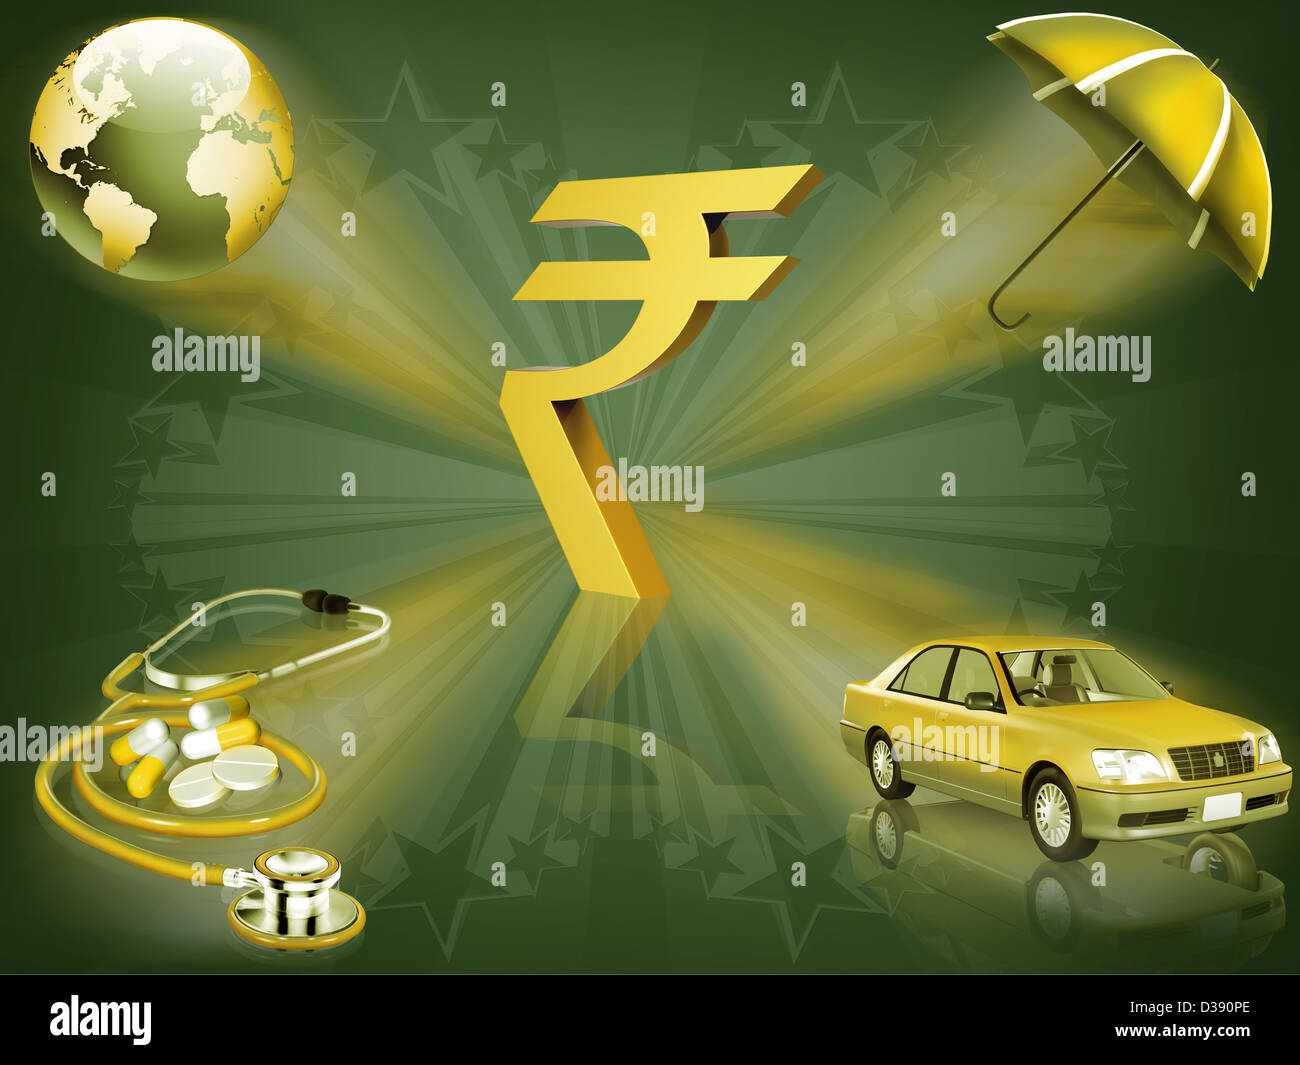 Indian rupee symbol with multiple insurances Stock Photo